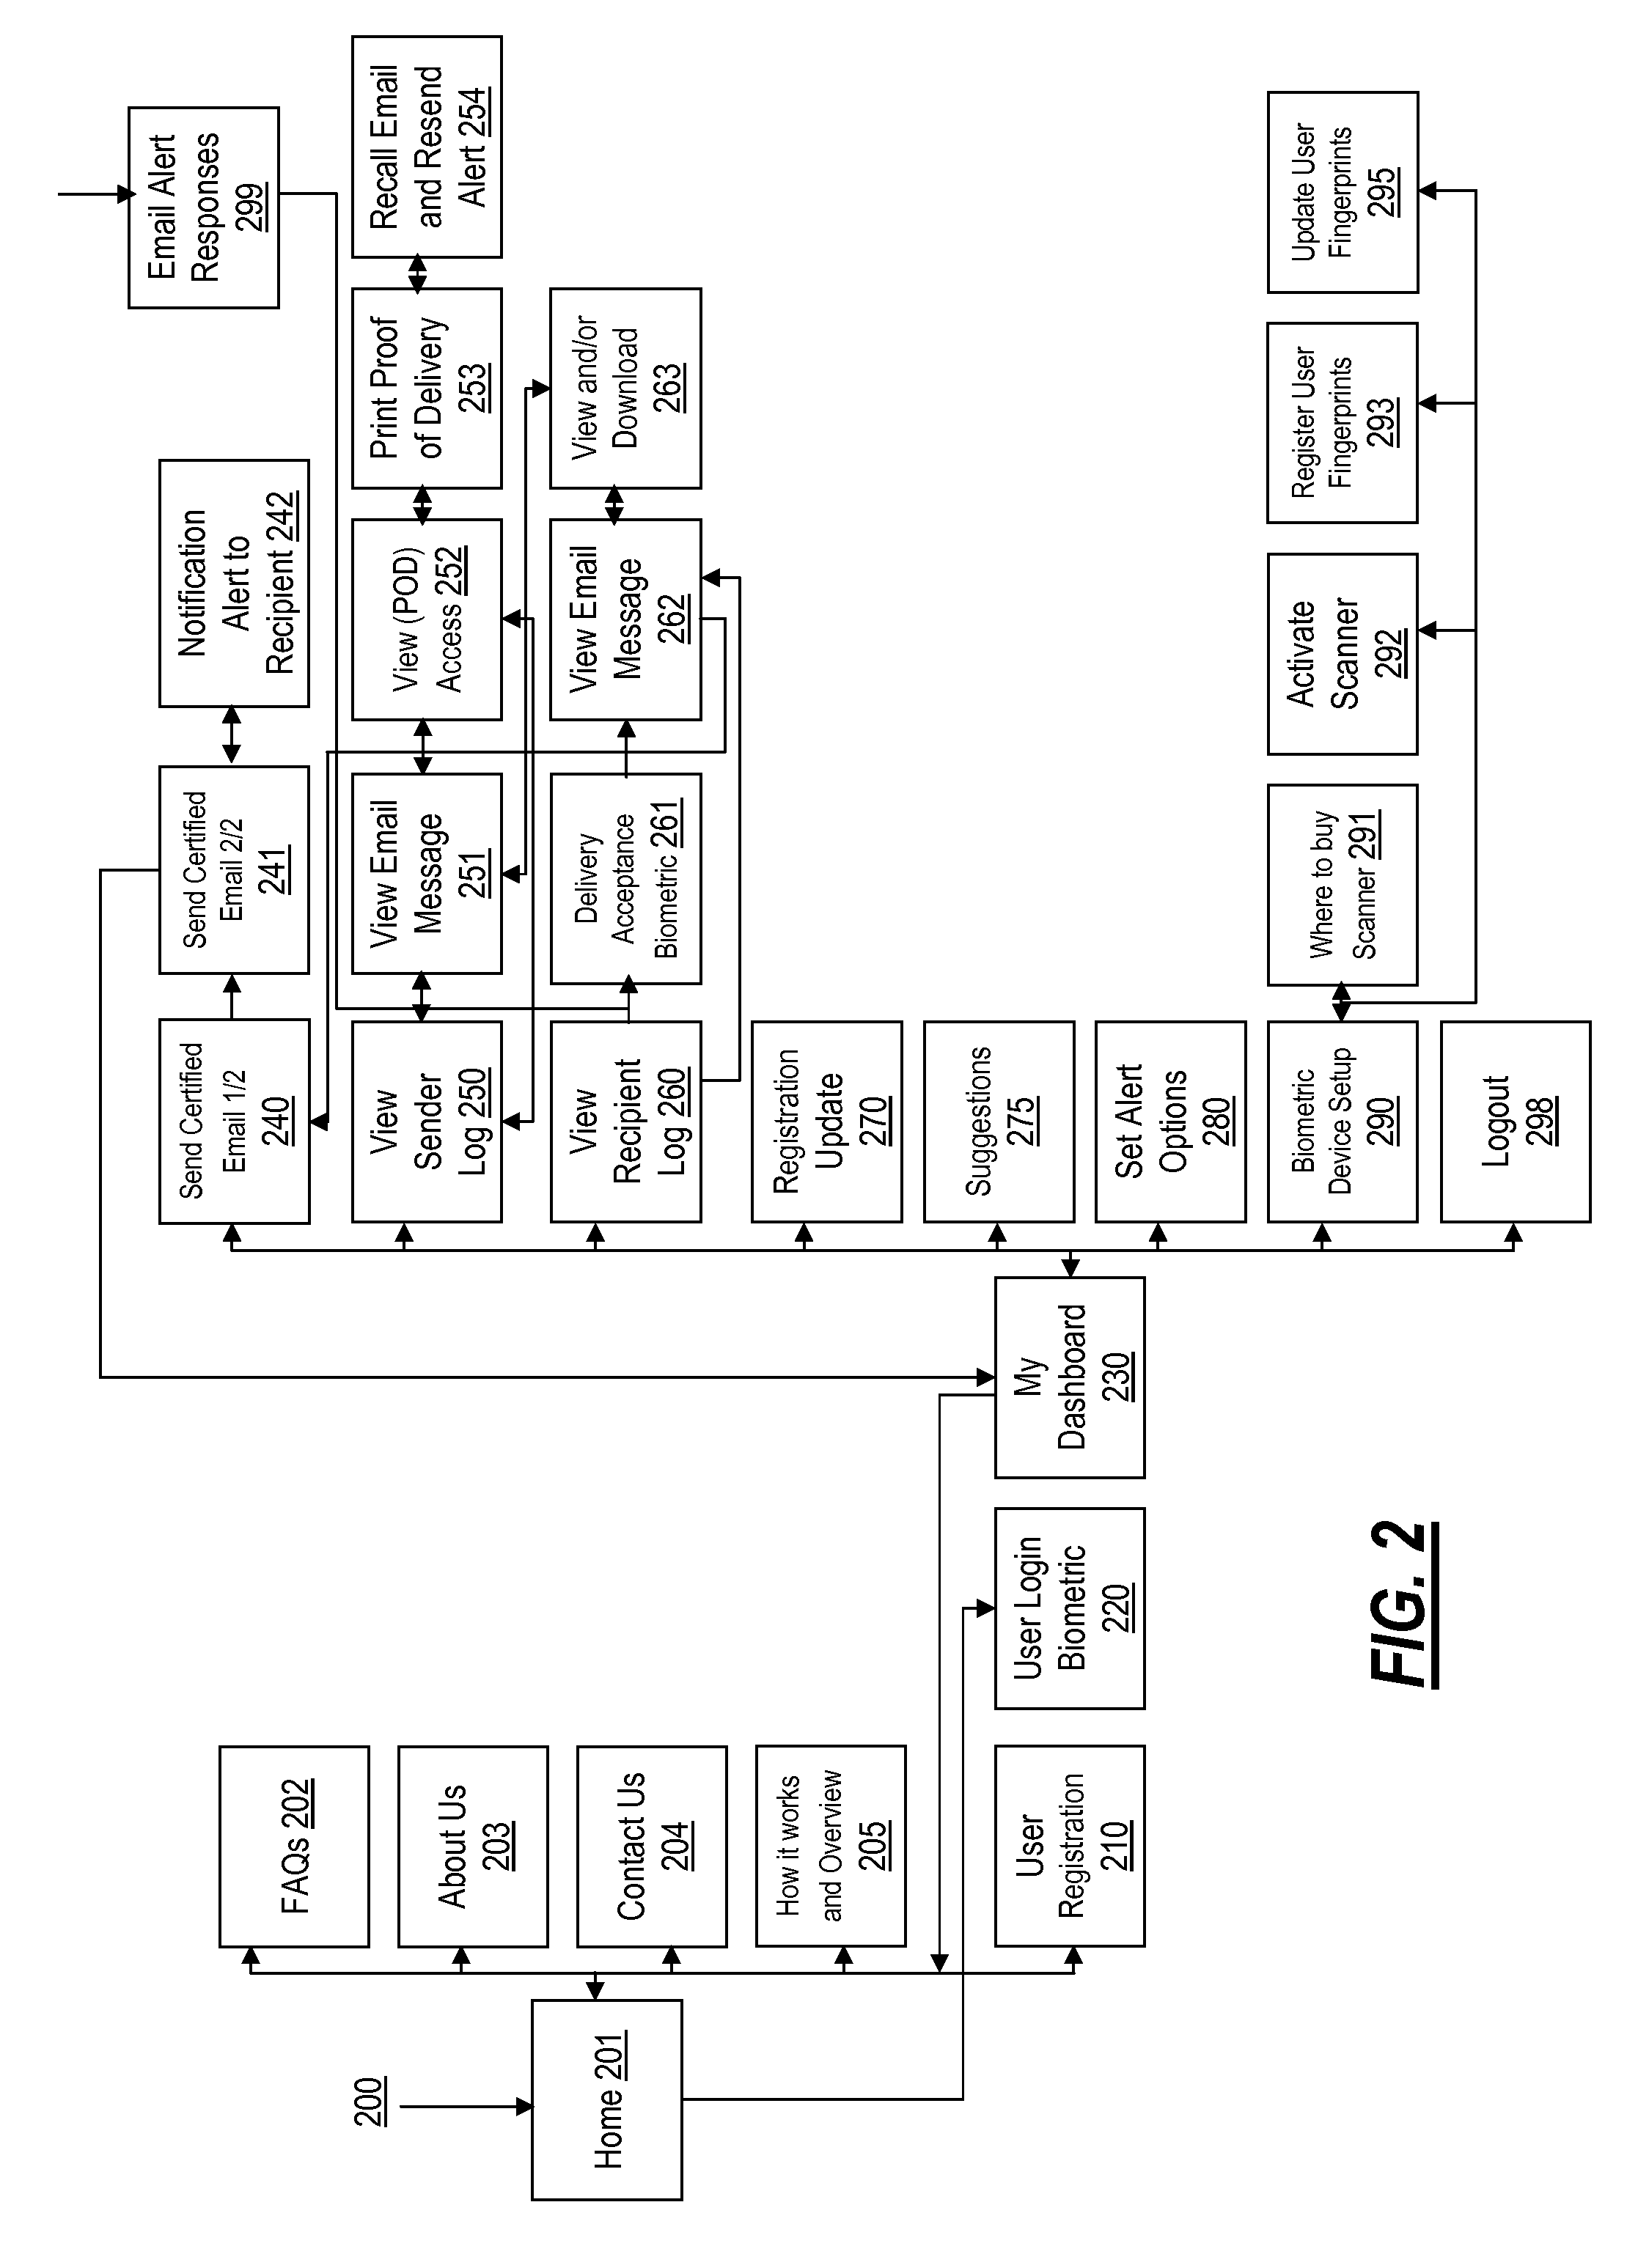 Systems and methods for secure and certified electronic messaging